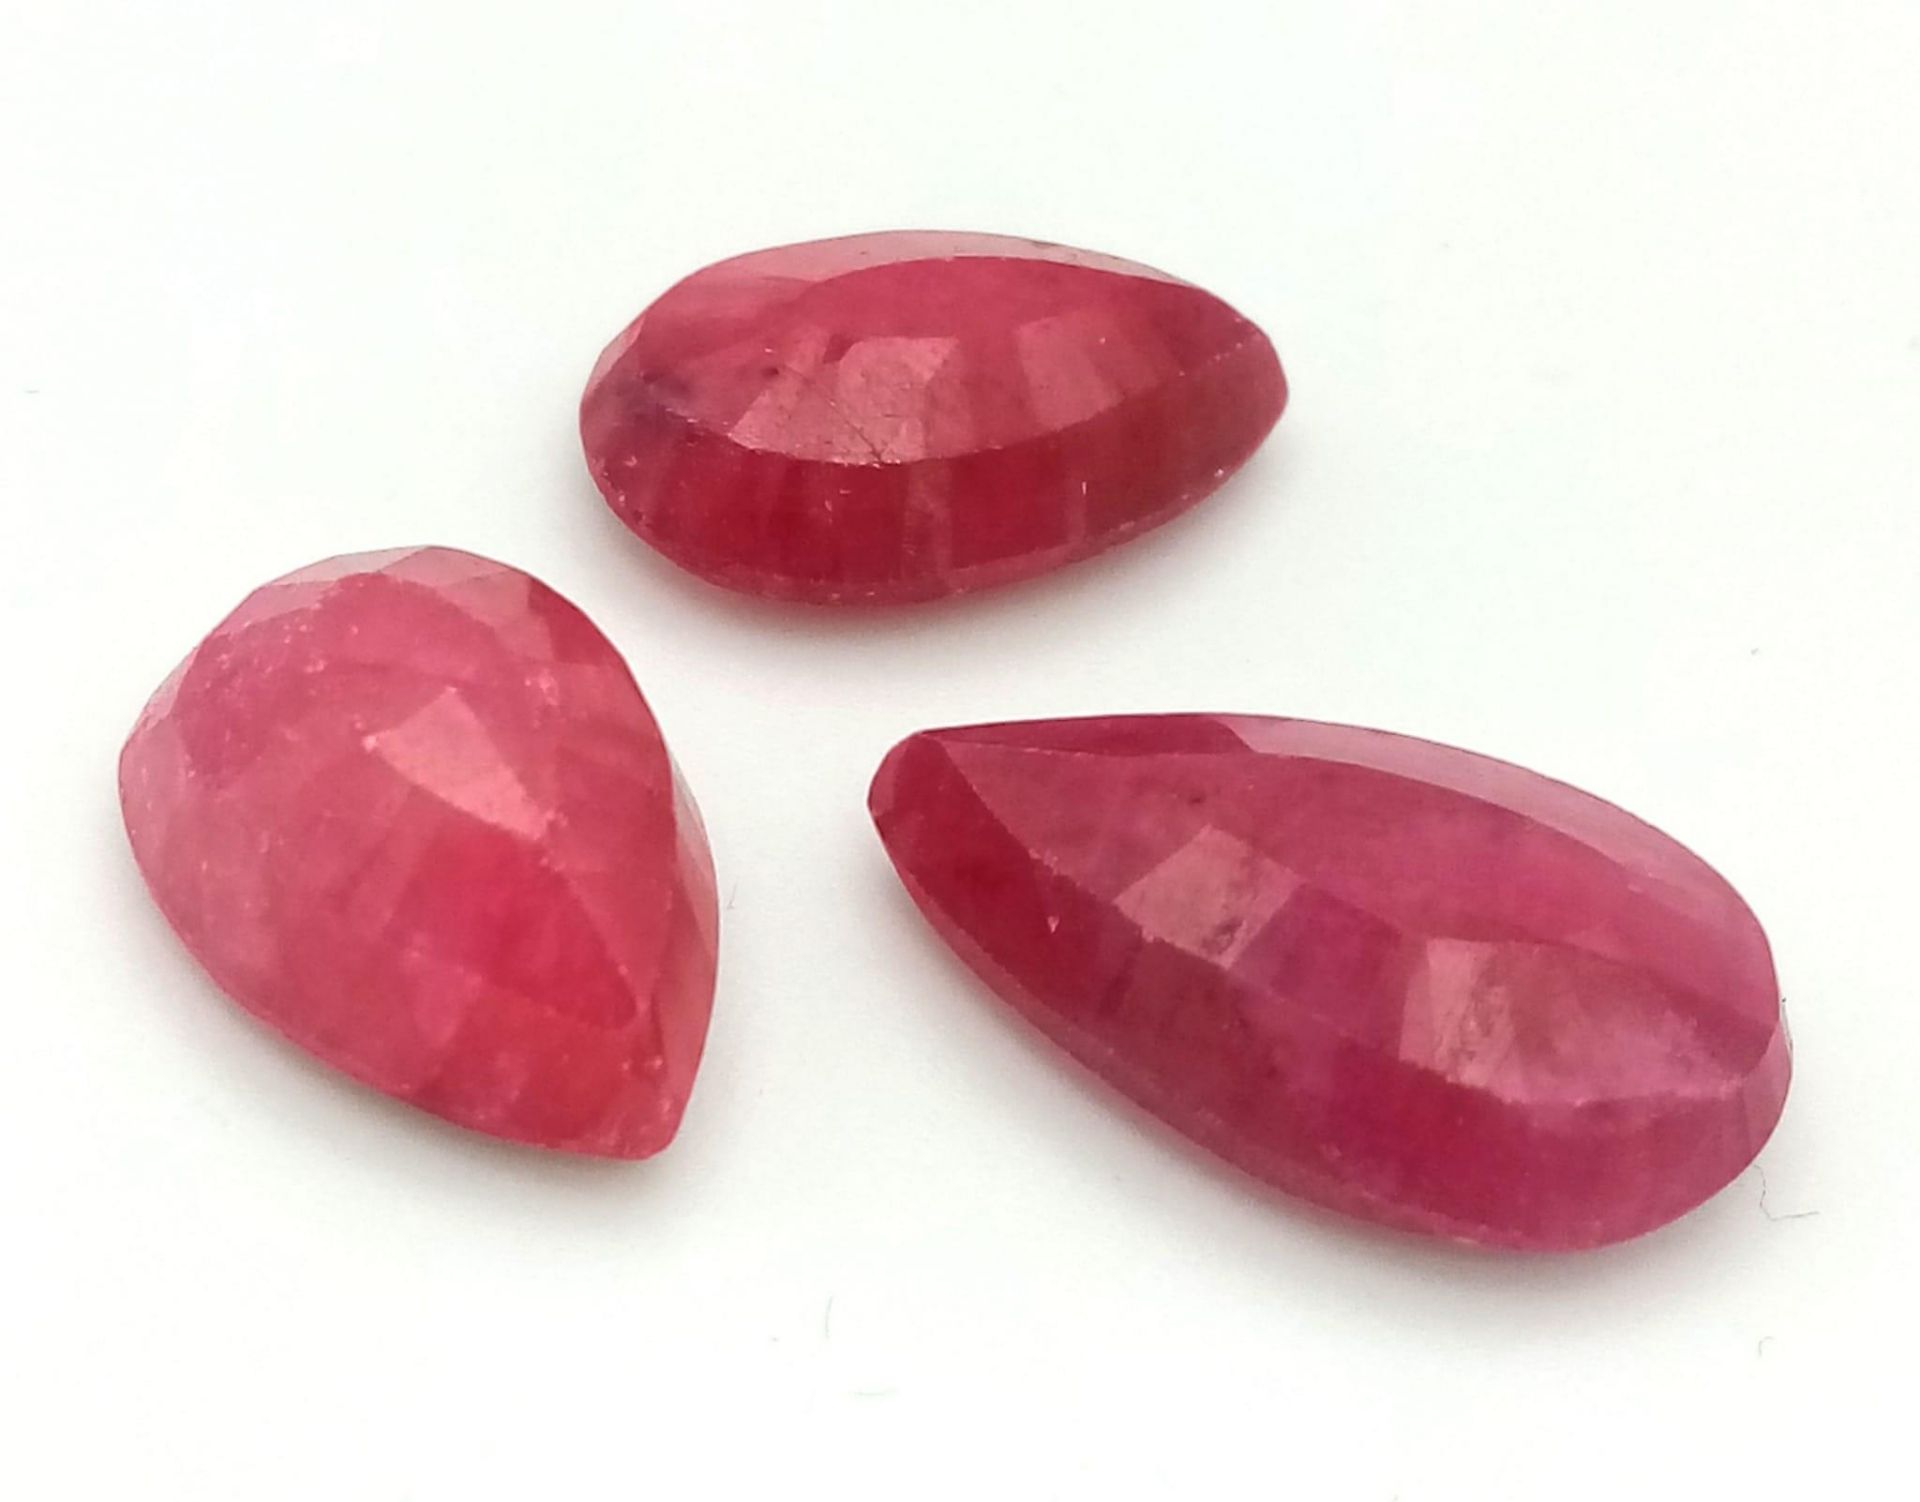 37.23 Ct Faceted Ruby Gemstones Lot of 3 Pcs, Pear Shapes, IGL&I Certified - Image 3 of 4